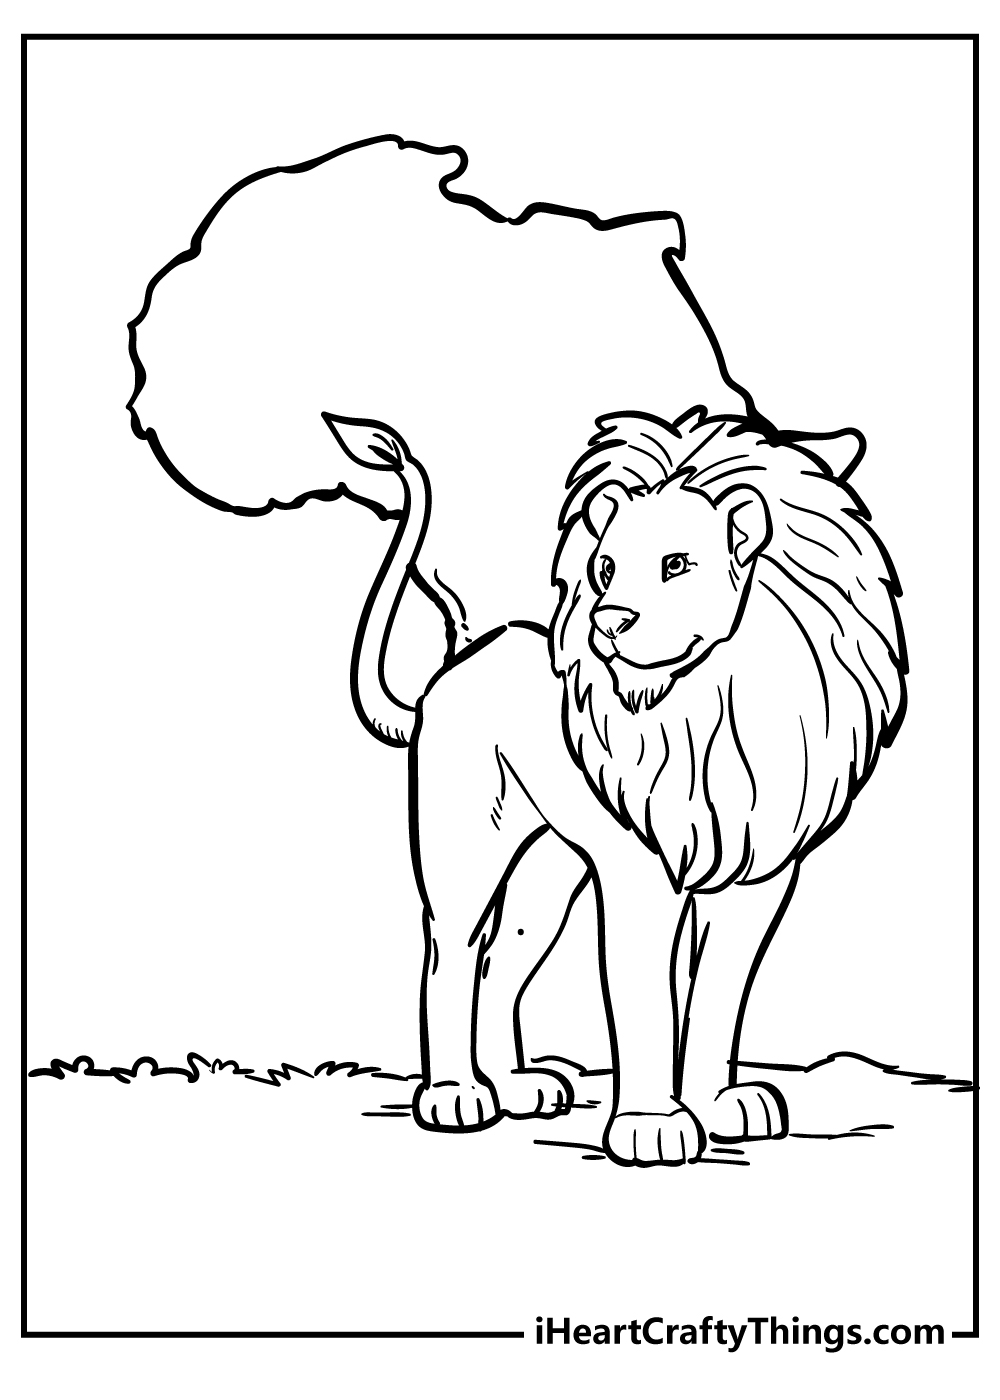 Africa Coloring Pages for adults free printable